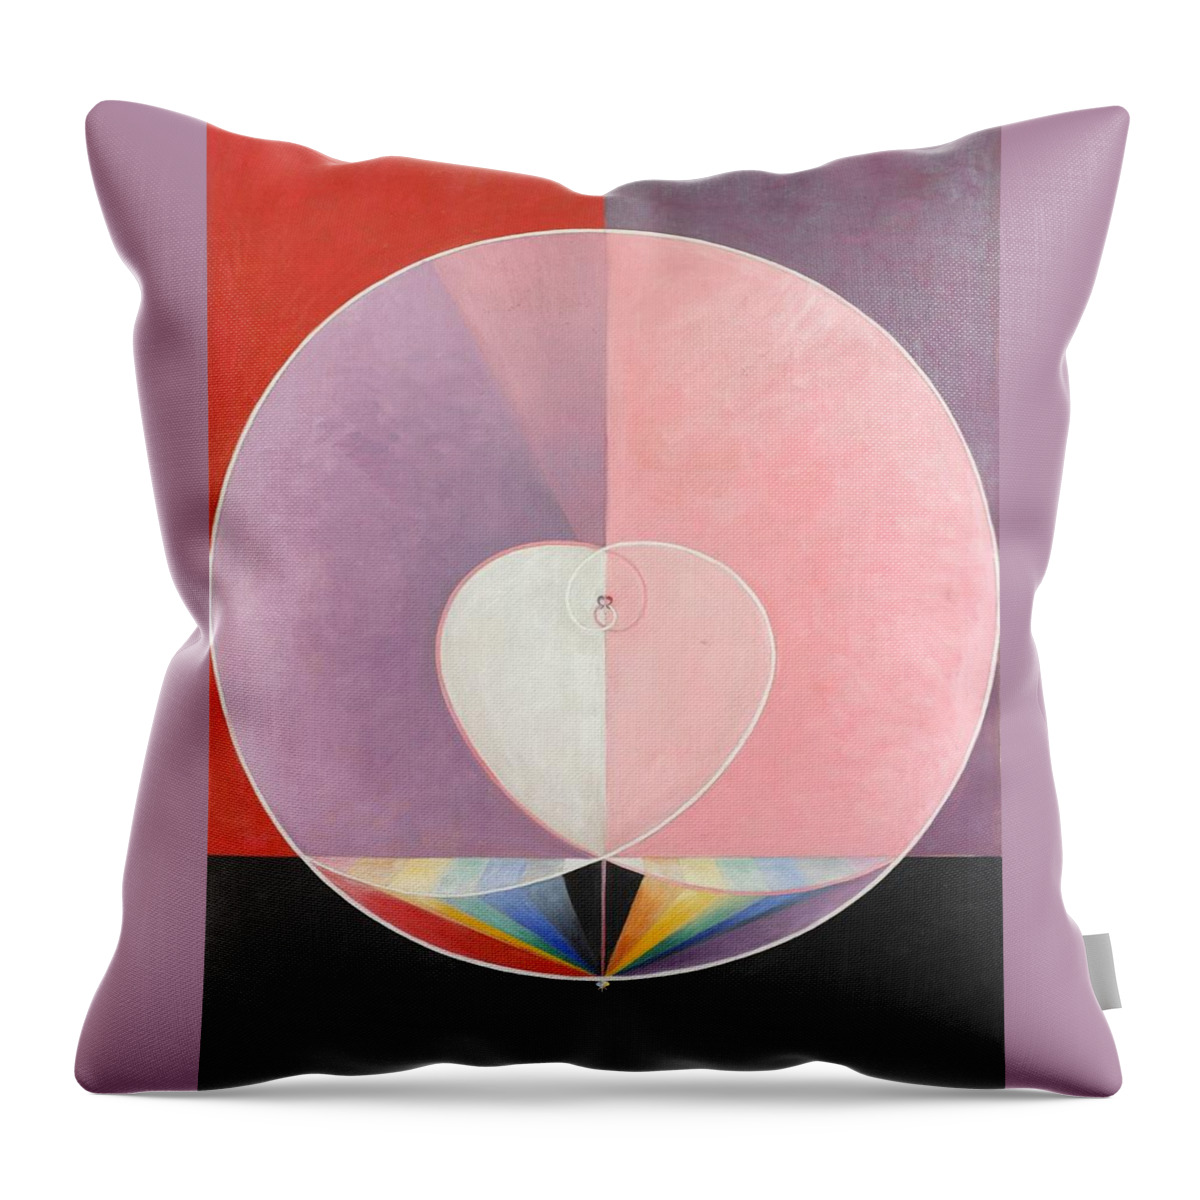 Doves No. 2 Throw Pillow featuring the painting Hilma af Klint by MotionAge Designs